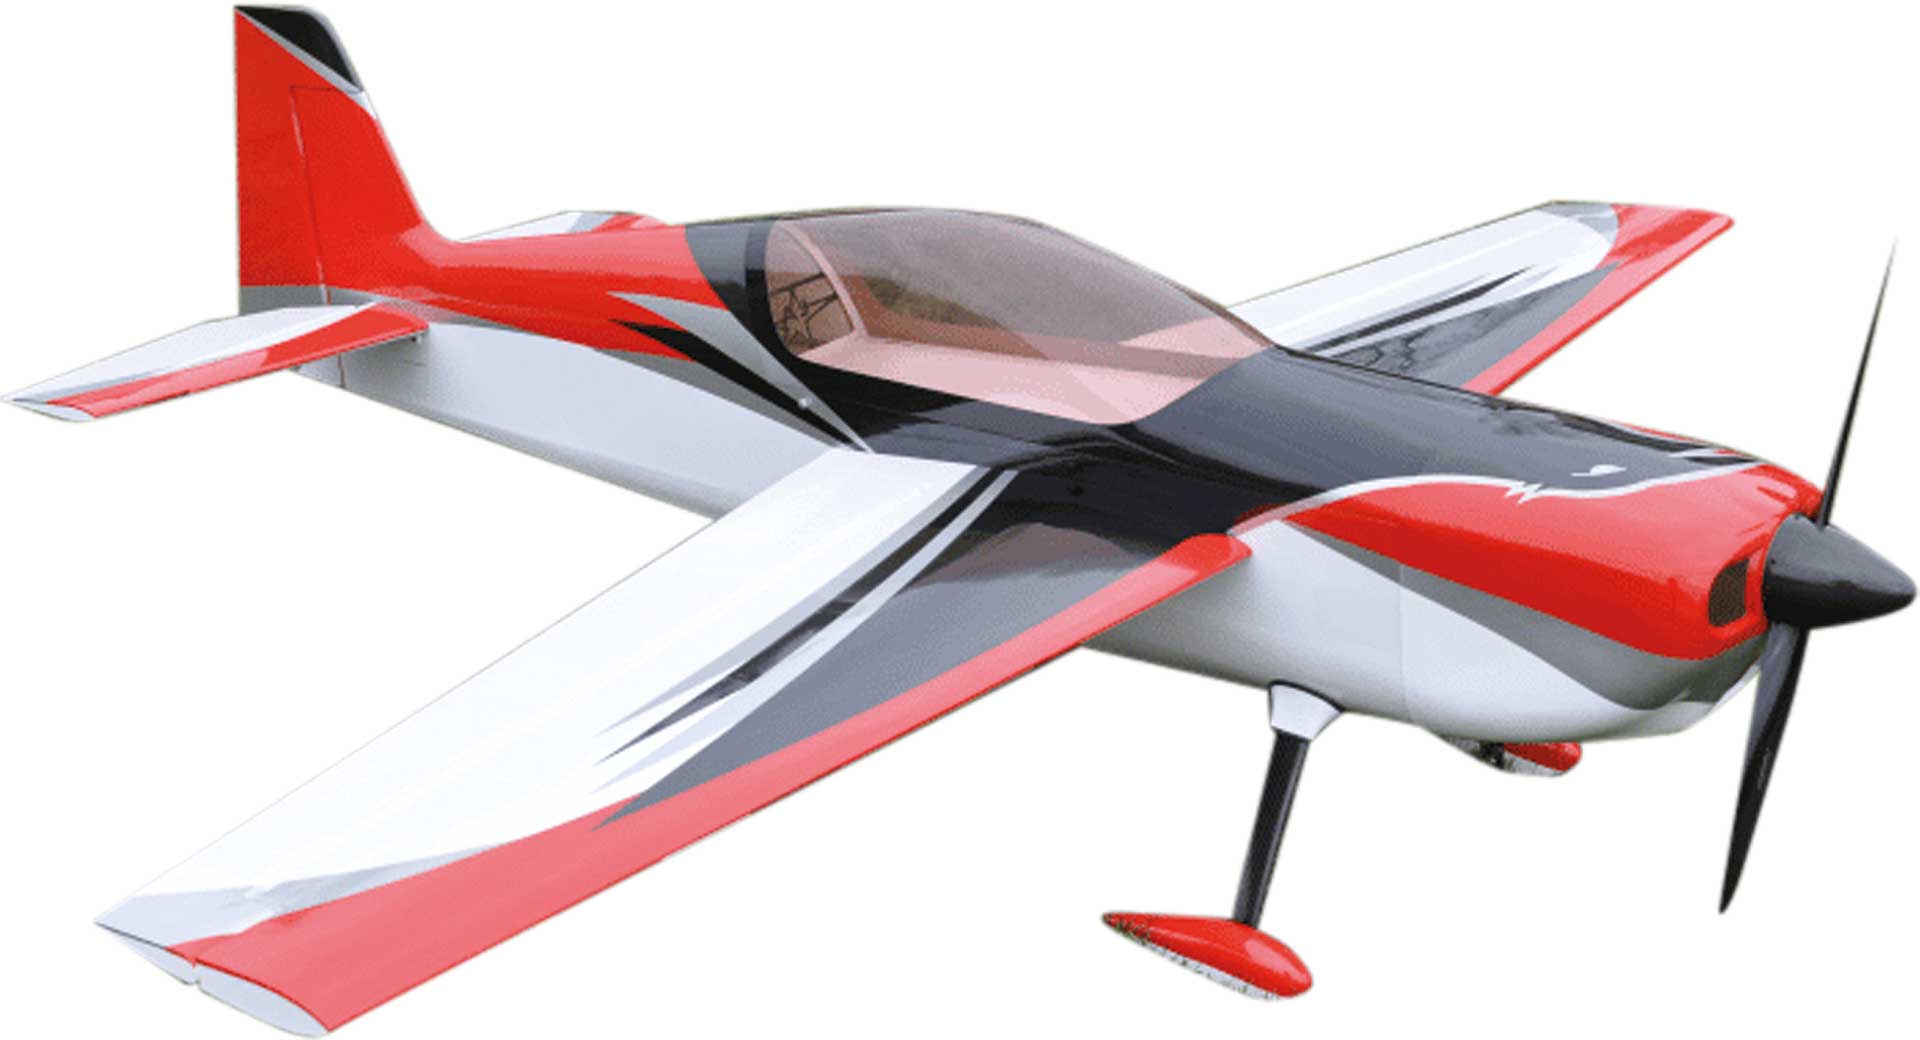 AJ AIRCRAFT Raven DT ARF 73" Rot Kunstflugmodell 1,85m ( double taper wing )